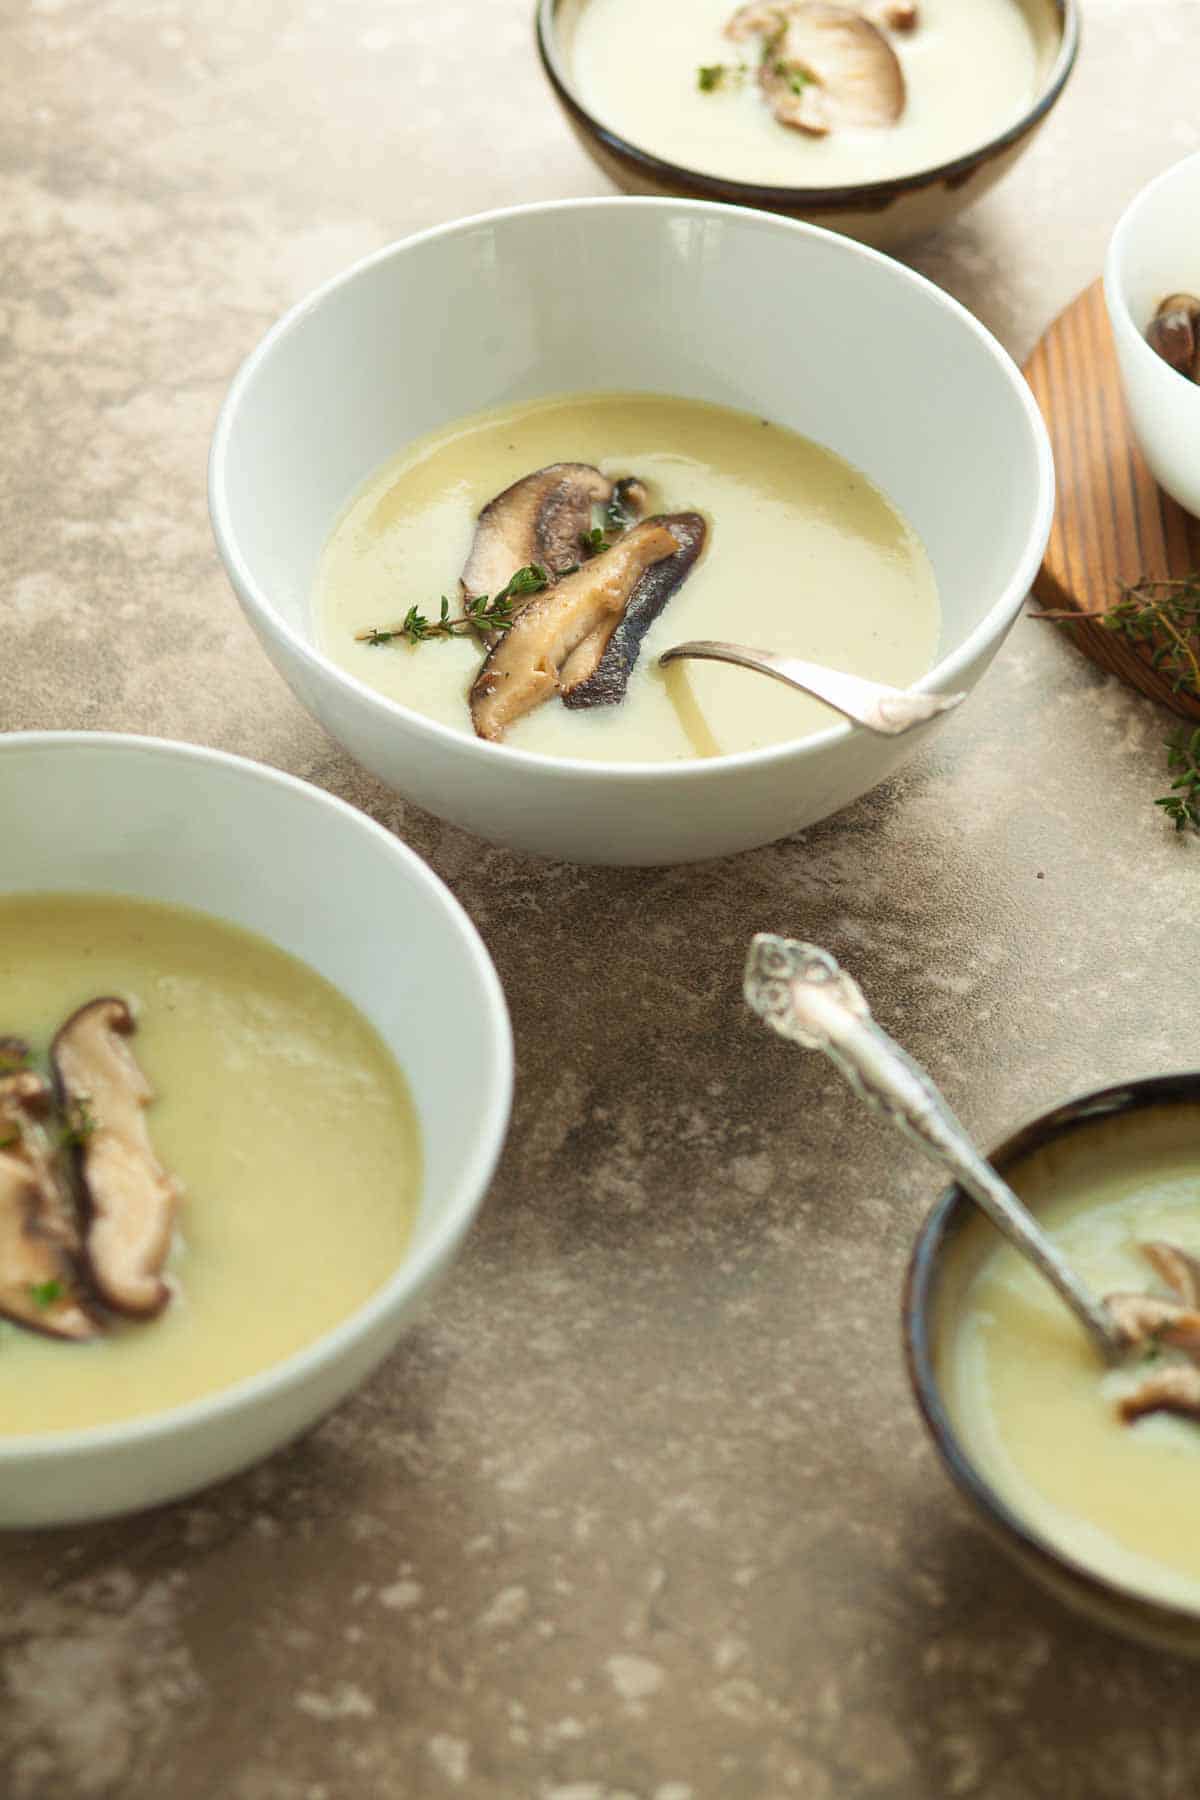 Celery Root Soup with Sautéed Shiitakes in Bowls